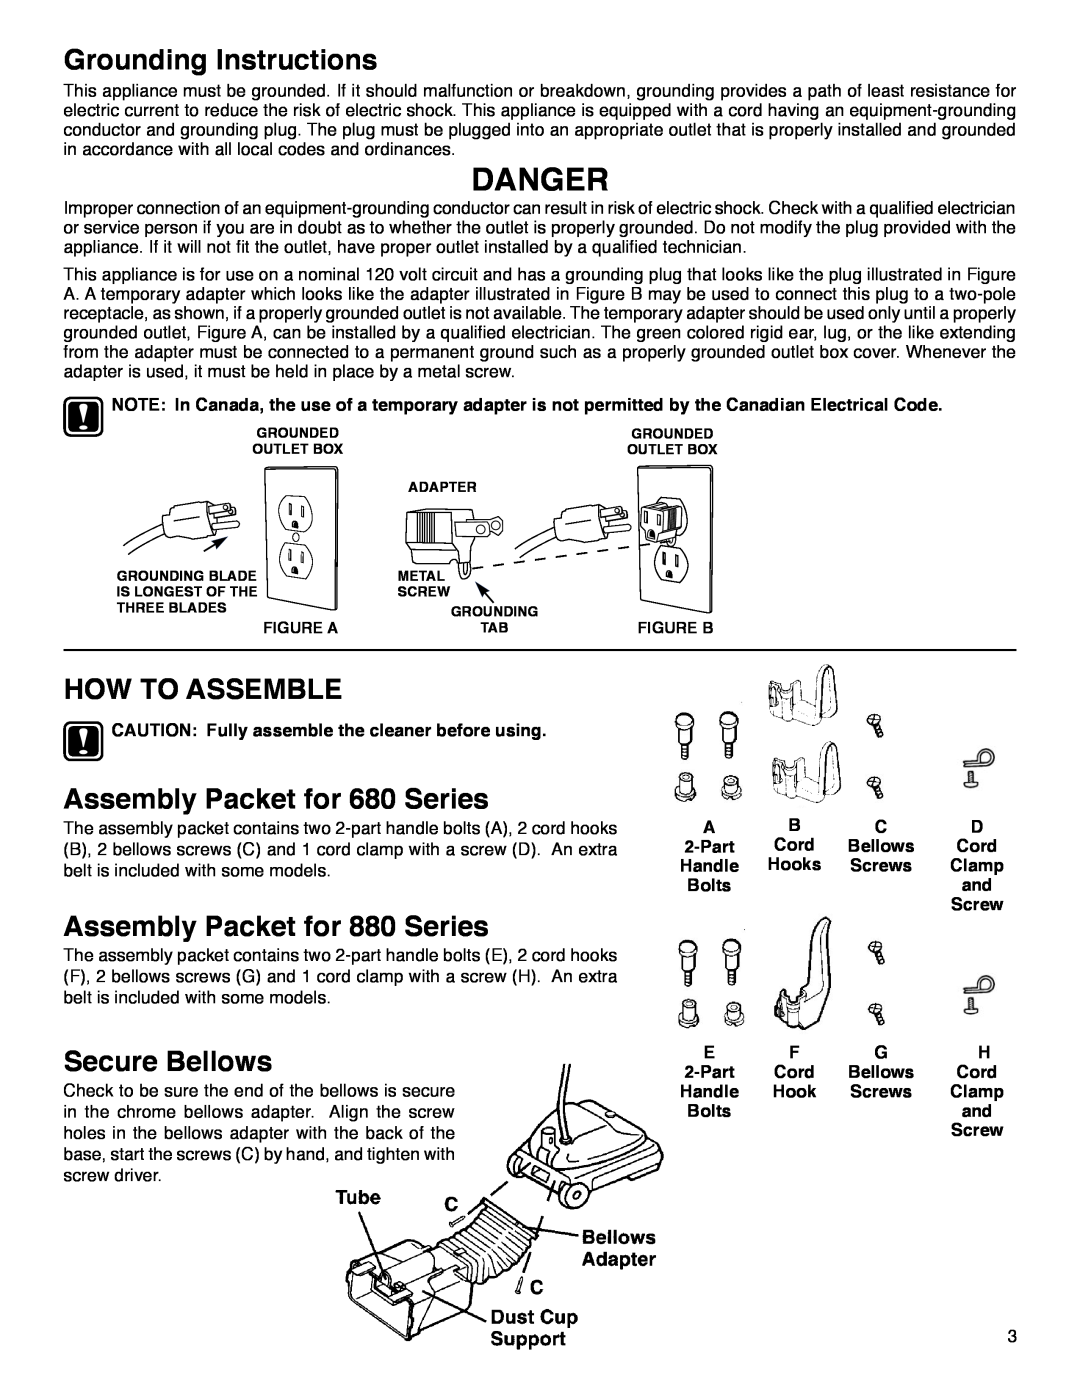 Sanitaire 880 Series Danger, Grounding Instructions, How To Assemble, Assembly Packet for 680 Series, Secure Bellows 